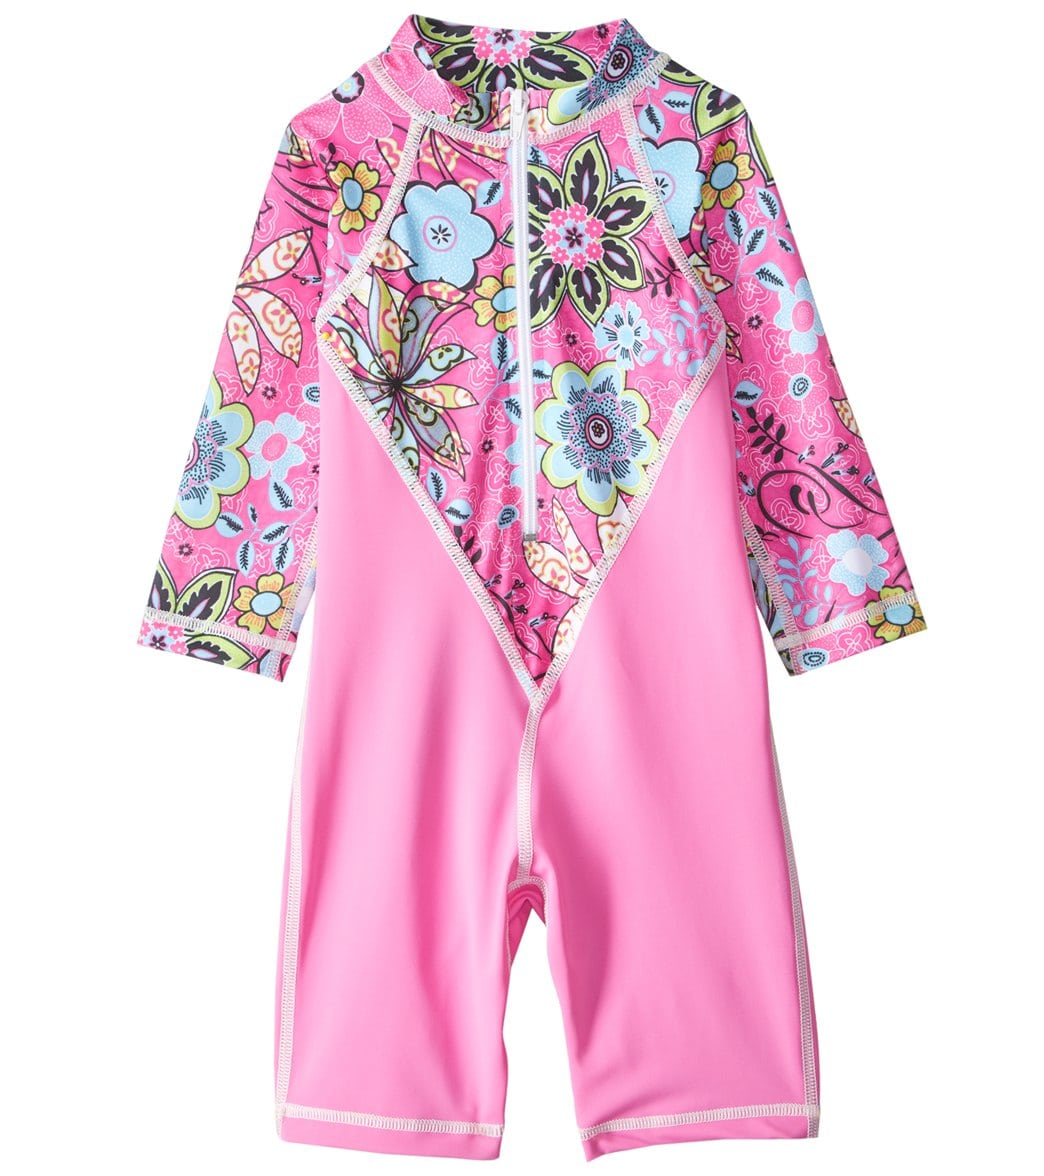 Tidepools Girls' Topsy Turvy Uv 50+ Suit Baby - Pink Large 12-18 Months Lycra®/Polyester - Swimoutlet.com